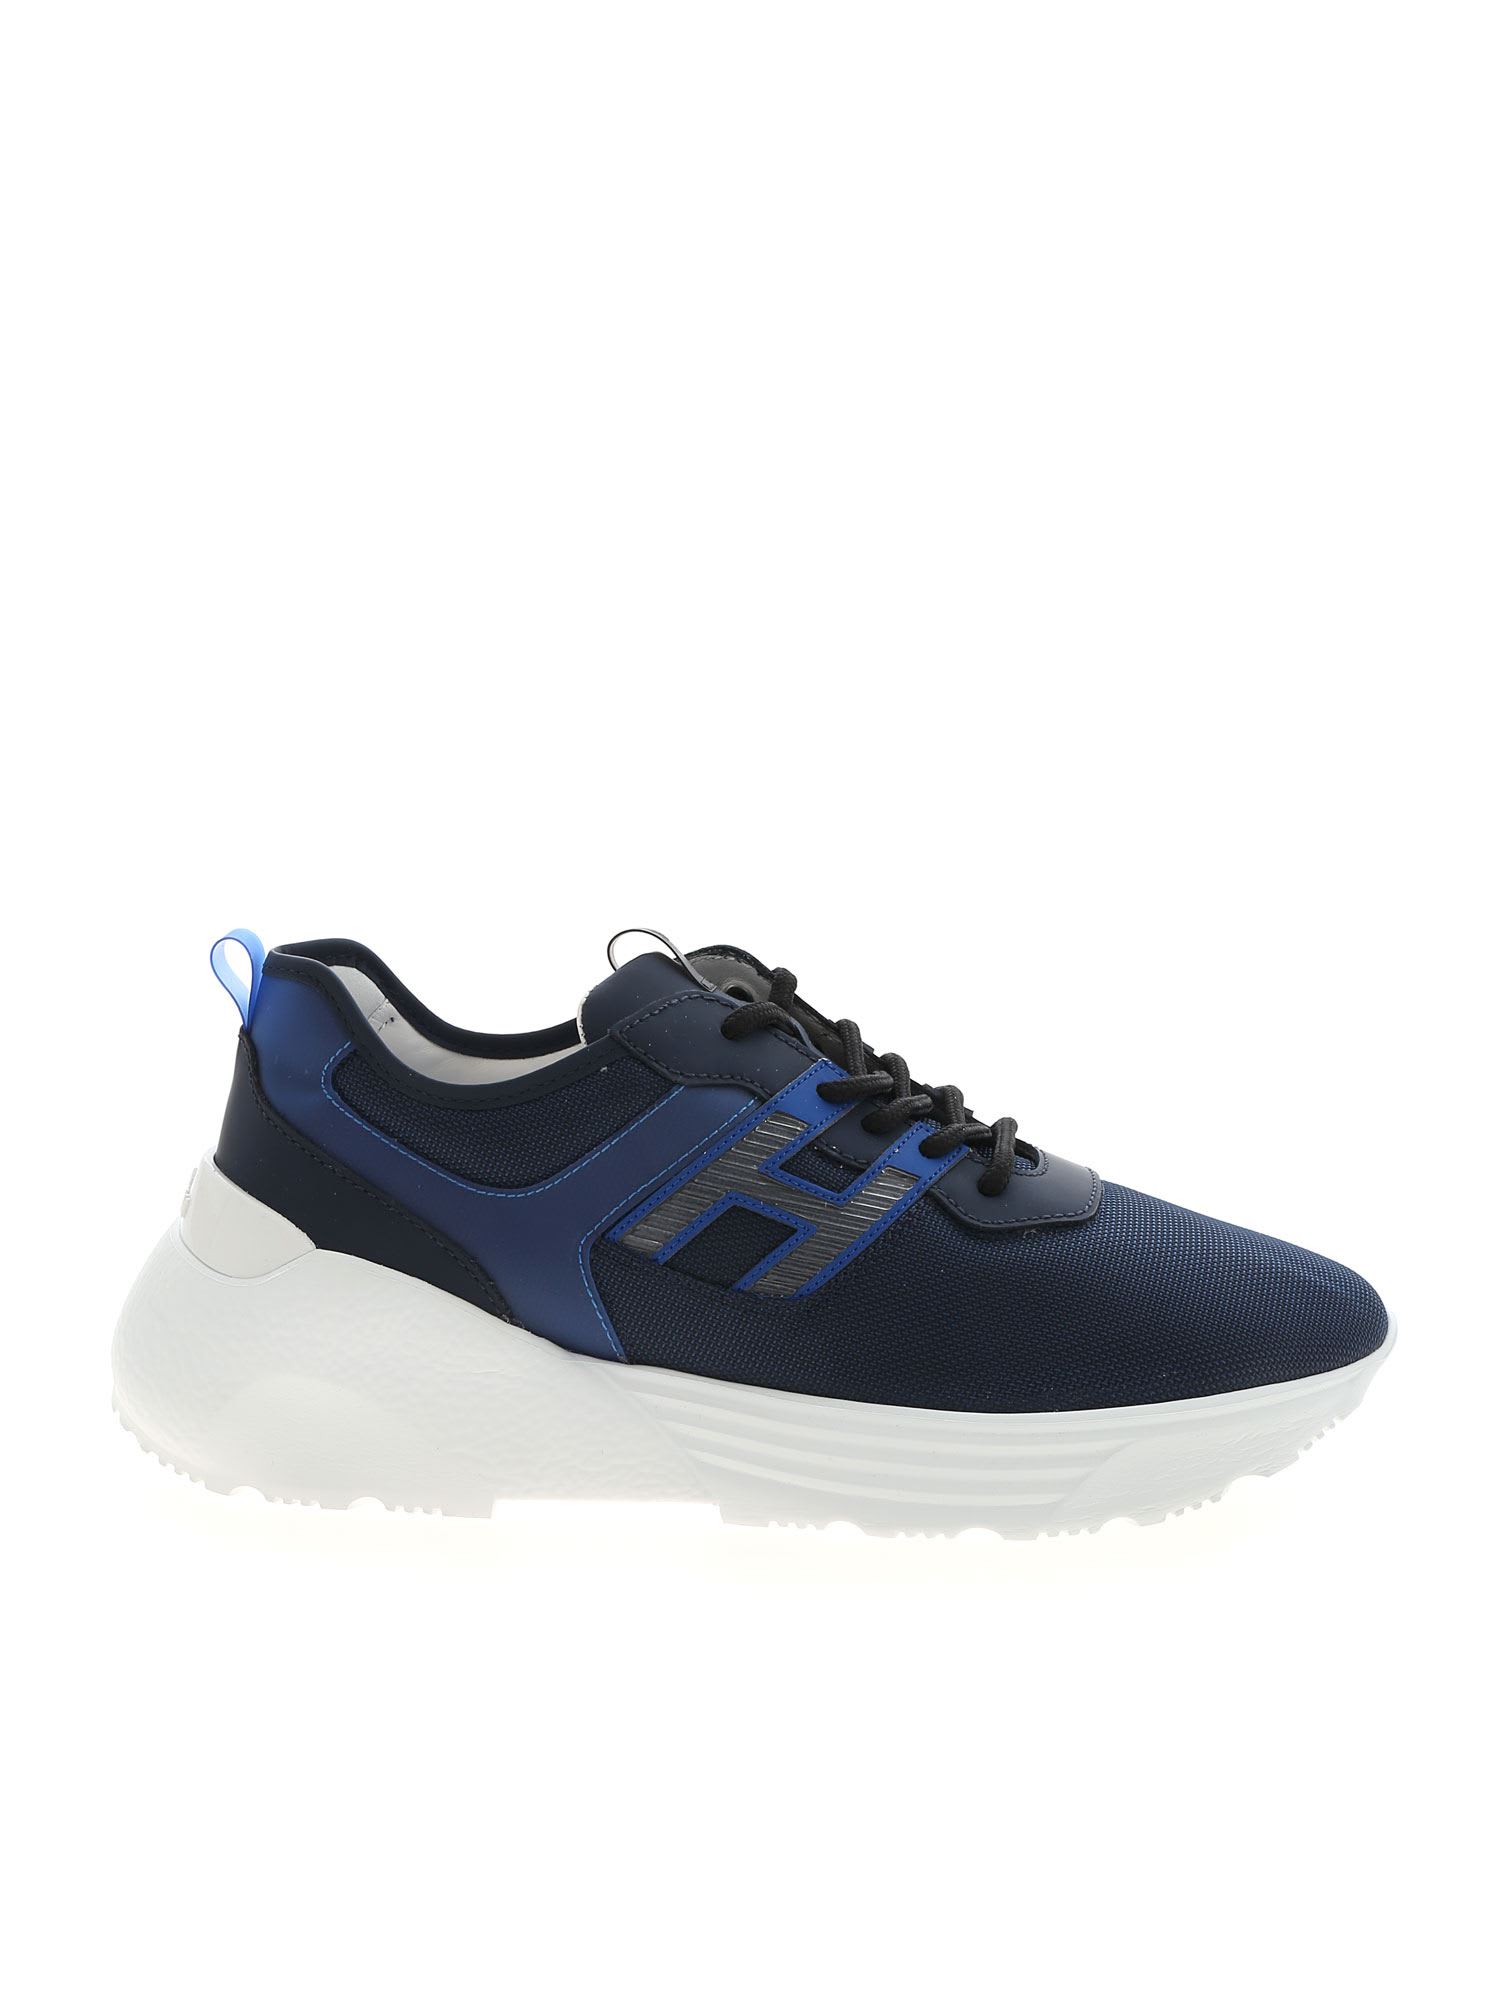 Hogan Active One Blue Sneakers